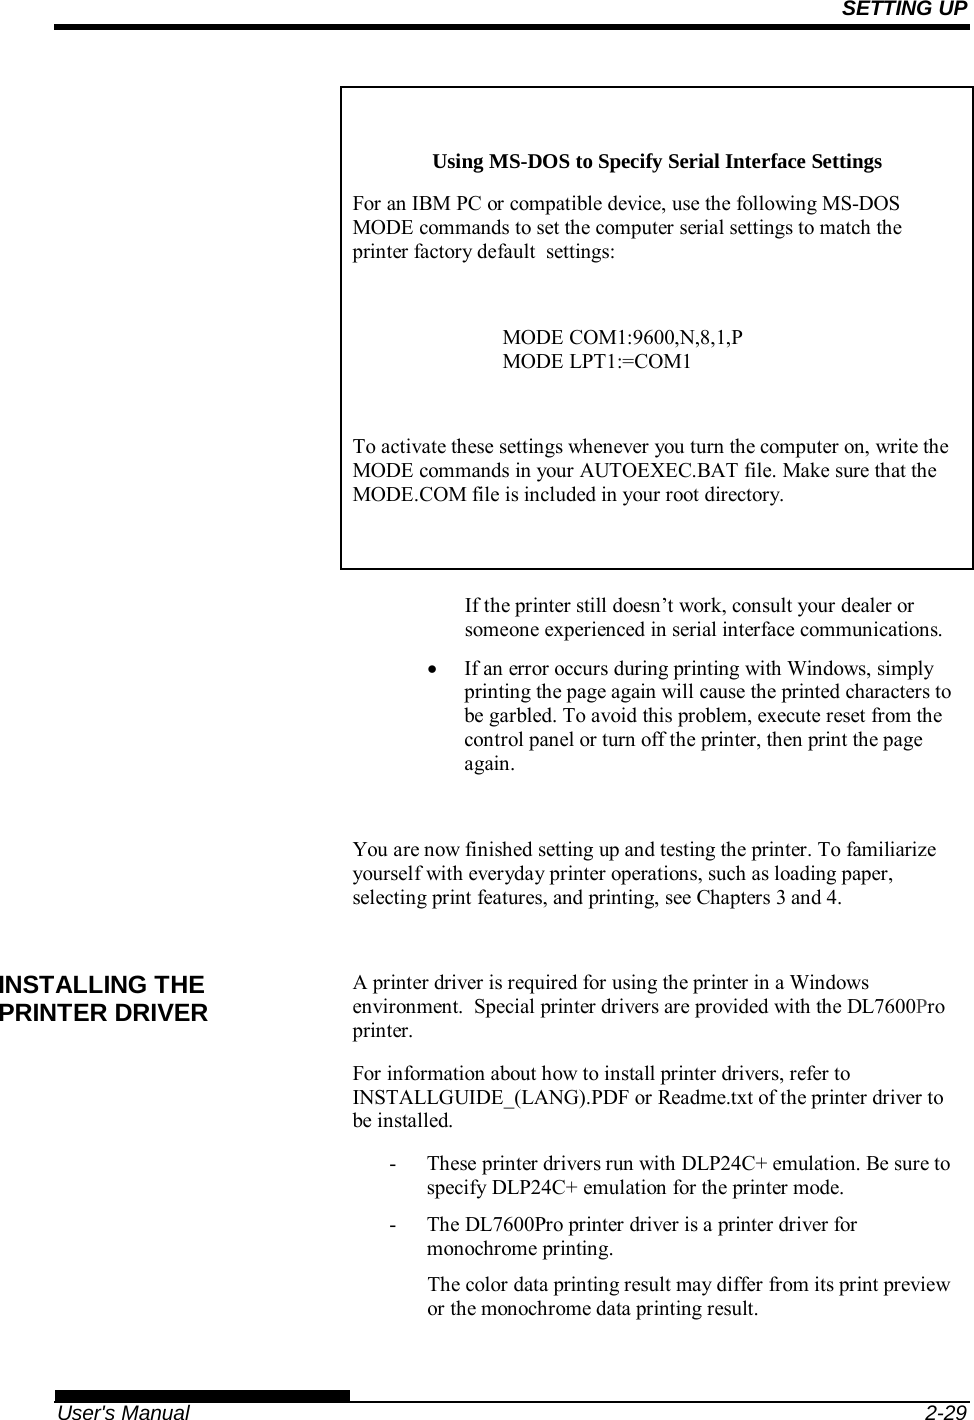 SETTING UP   User&apos;s Manual  2-29  Using MS-DOS to Specify Serial Interface Settings For an IBM PC or compatible device, use the following MS-DOS MODE commands to set the computer serial settings to match the printer factory default  settings:  MODE COM1:9600,N,8,1,P MODE LPT1:=COM1  To activate these settings whenever you turn the computer on, write the MODE commands in your AUTOEXEC.BAT file. Make sure that the MODE.COM file is included in your root directory.   If the printer still doesn’t work, consult your dealer or someone experienced in serial interface communications.   If an error occurs during printing with Windows, simply printing the page again will cause the printed characters to be garbled. To avoid this problem, execute reset from the control panel or turn off the printer, then print the page again.  You are now finished setting up and testing the printer. To familiarize yourself with everyday printer operations, such as loading paper, selecting print features, and printing, see Chapters 3 and 4.  A printer driver is required for using the printer in a Windows environment.  Special printer drivers are provided with the DL7600Pro printer. For information about how to install printer drivers, refer to INSTALLGUIDE_(LANG).PDF or Readme.txt of the printer driver to be installed. -  These printer drivers run with DLP24C+ emulation. Be sure to specify DLP24C+ emulation for the printer mode. -  The DL7600Pro printer driver is a printer driver for monochrome printing. The color data printing result may differ from its print preview or the monochrome data printing result.  INSTALLING THE PRINTER DRIVER 